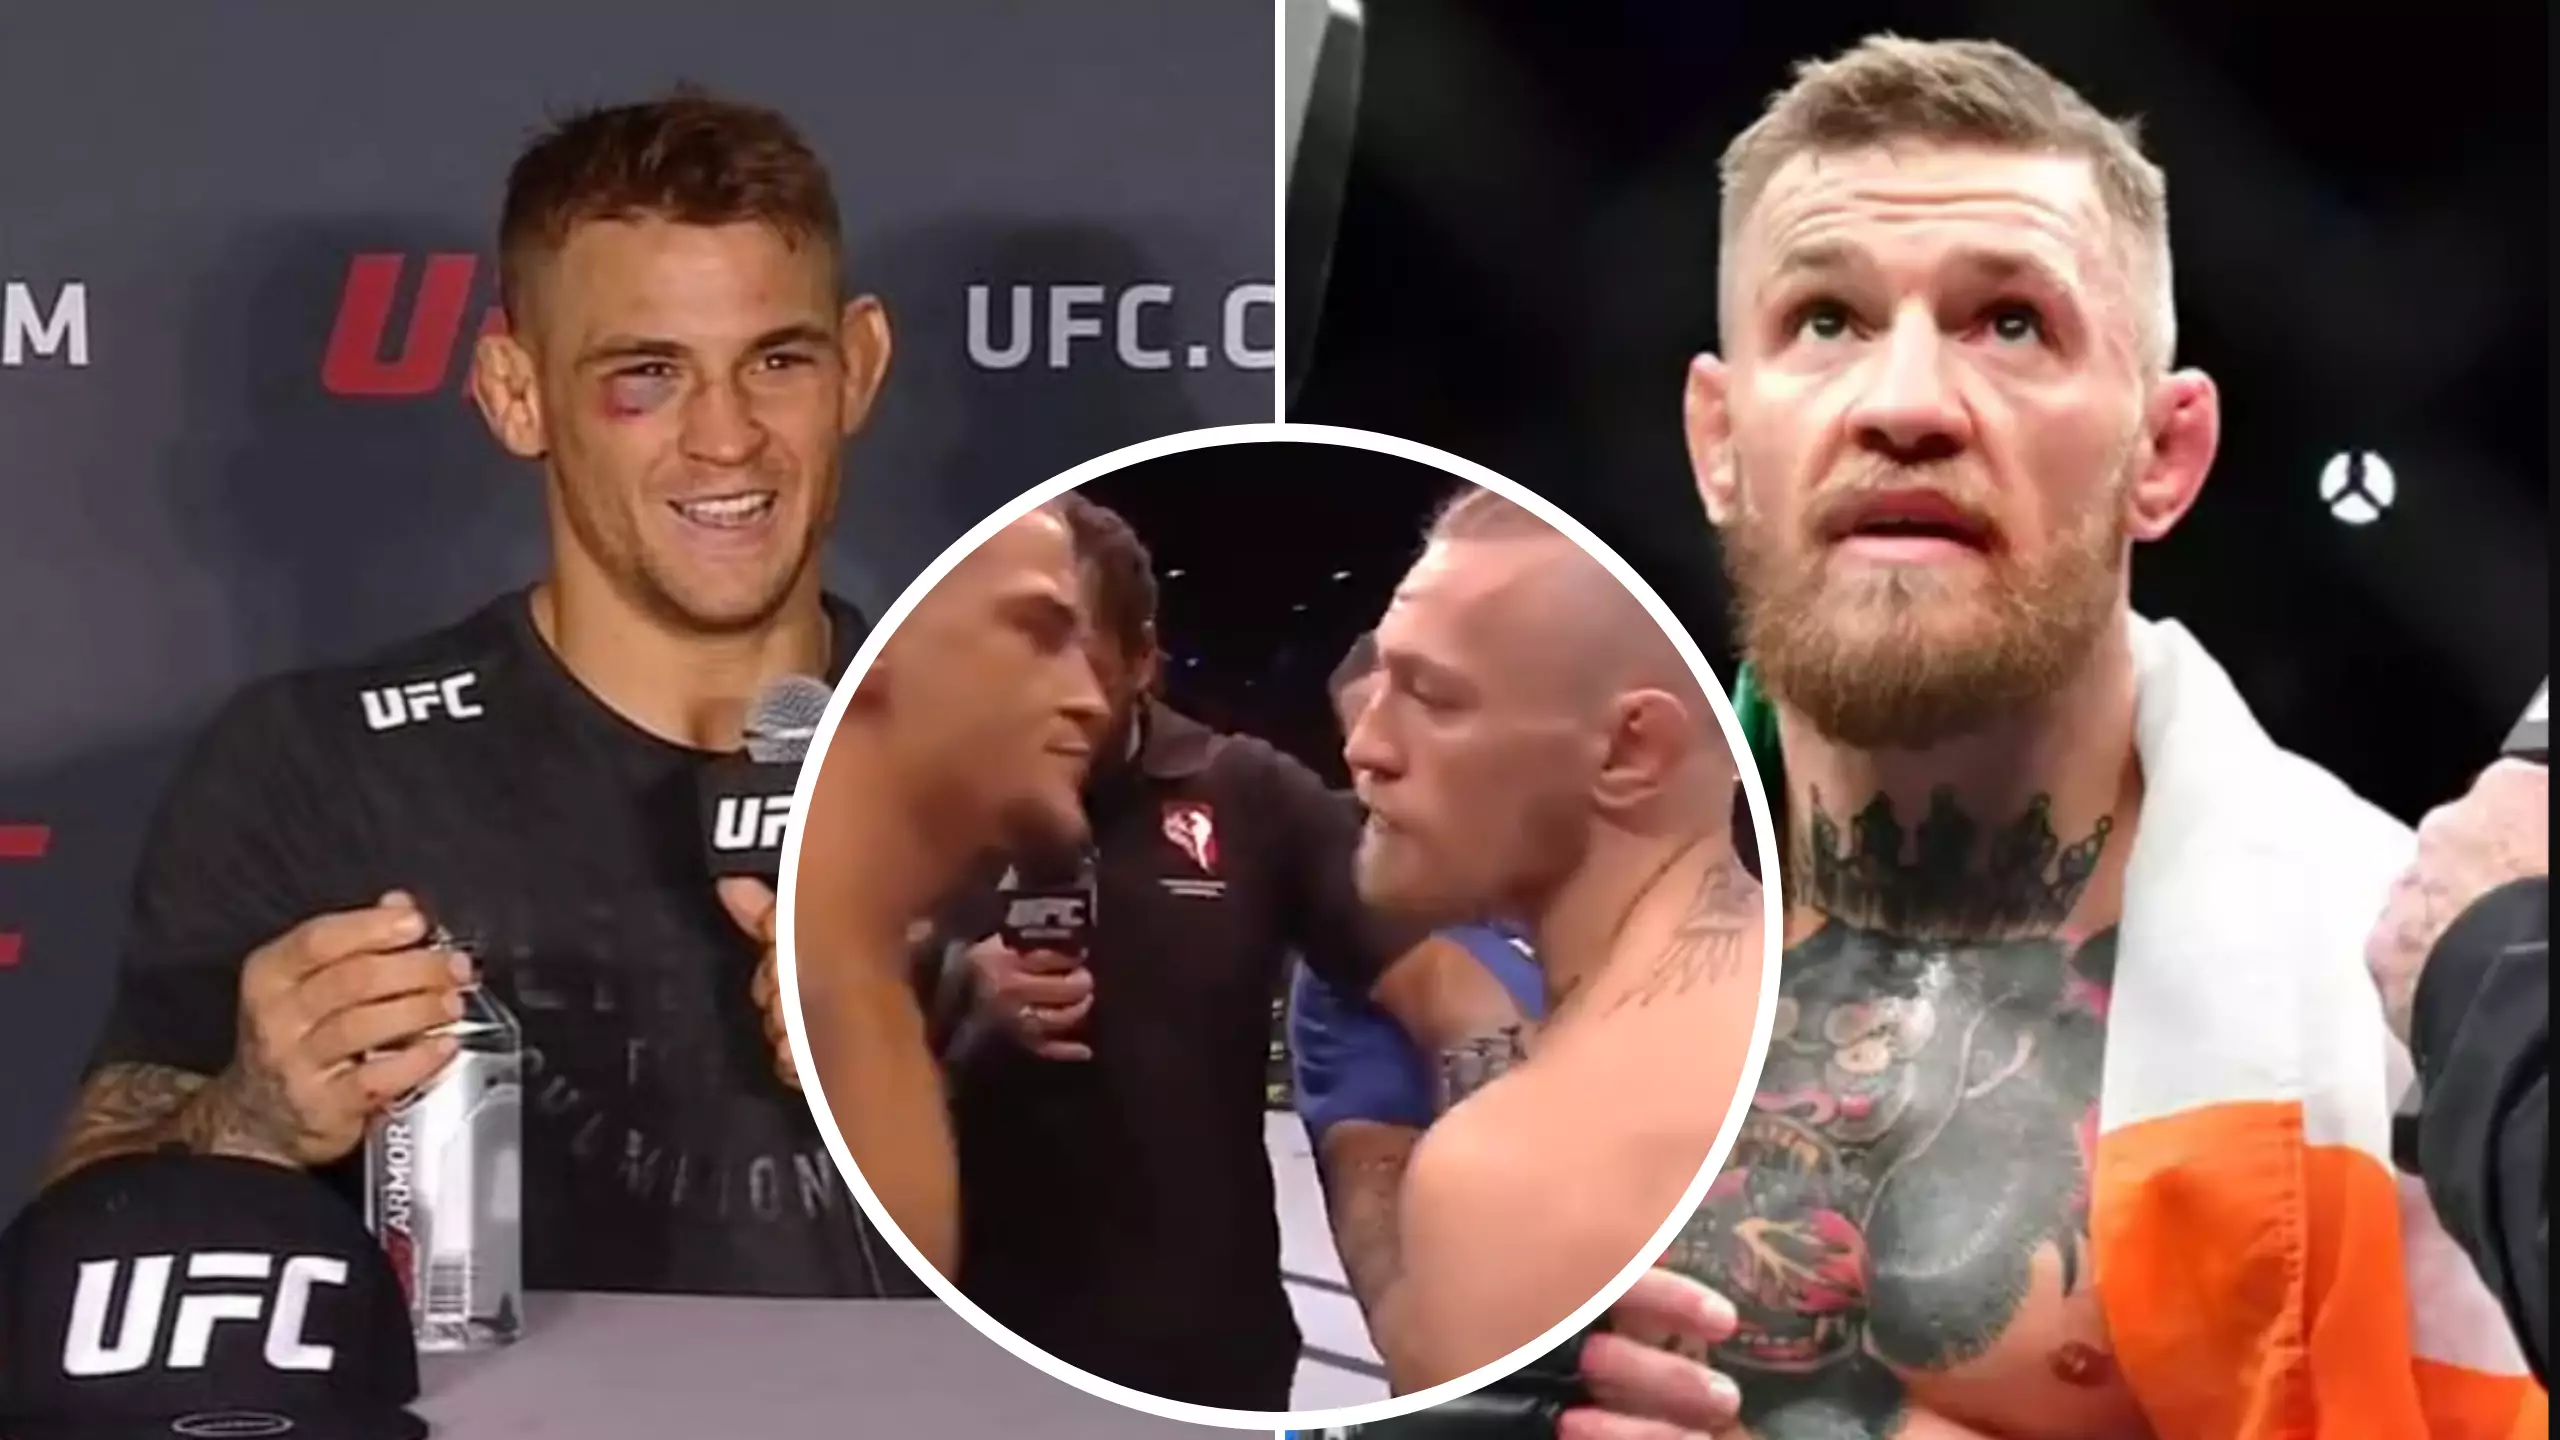 Dustin Poirier Names Conor McGregor As The Hardest Hitter He Has Fought